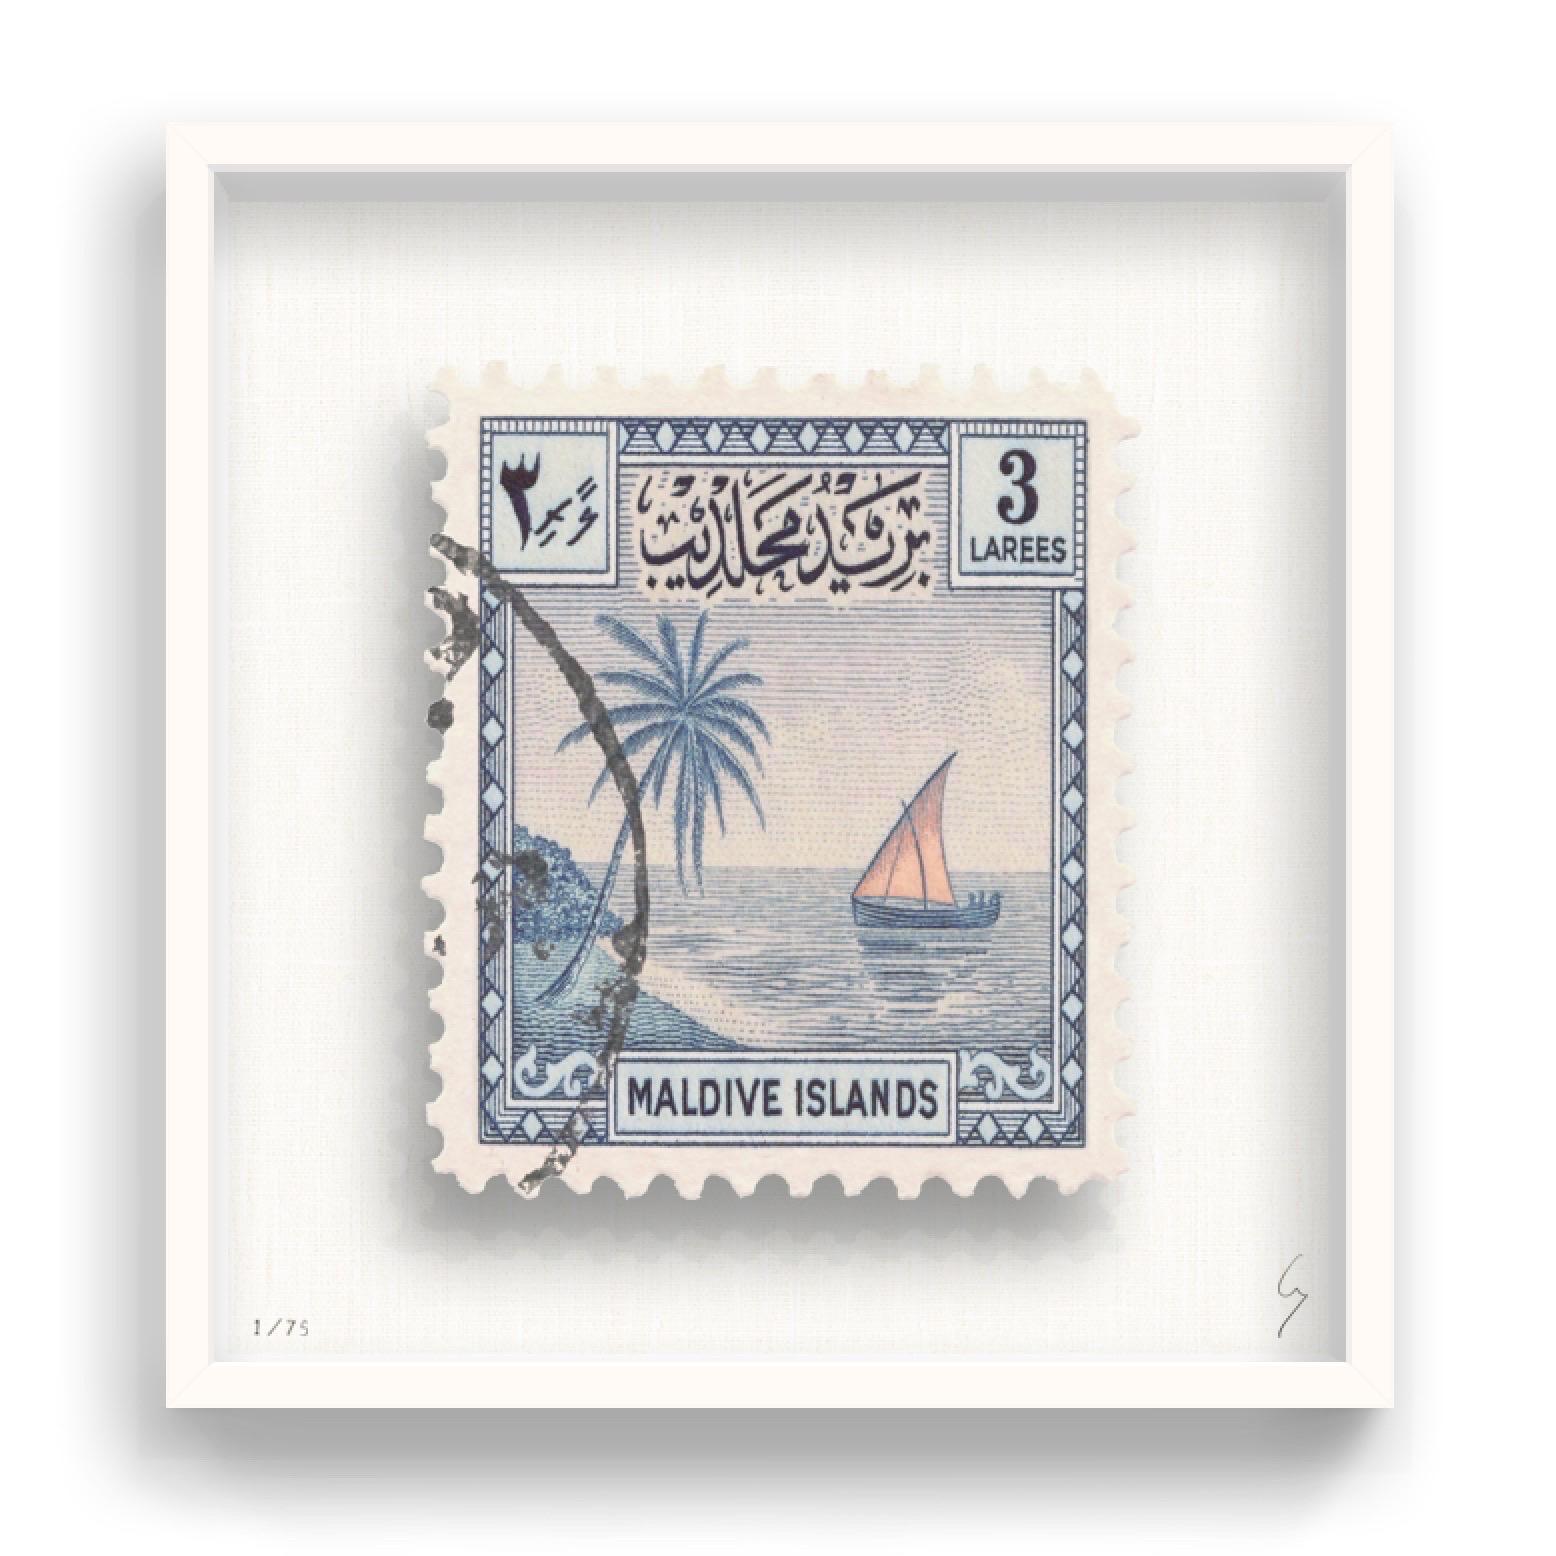 Guy Gee, Maldives (medium)

Hand-engraved print on 350gsm on G.F Smith card
53 x 56cm (20 4/5 x 22 2/5 in)
Frame included
Edition of 75

Each artwork by Guy had been digitally reimagined from an original postage stamp. Cut out and finished by hand,